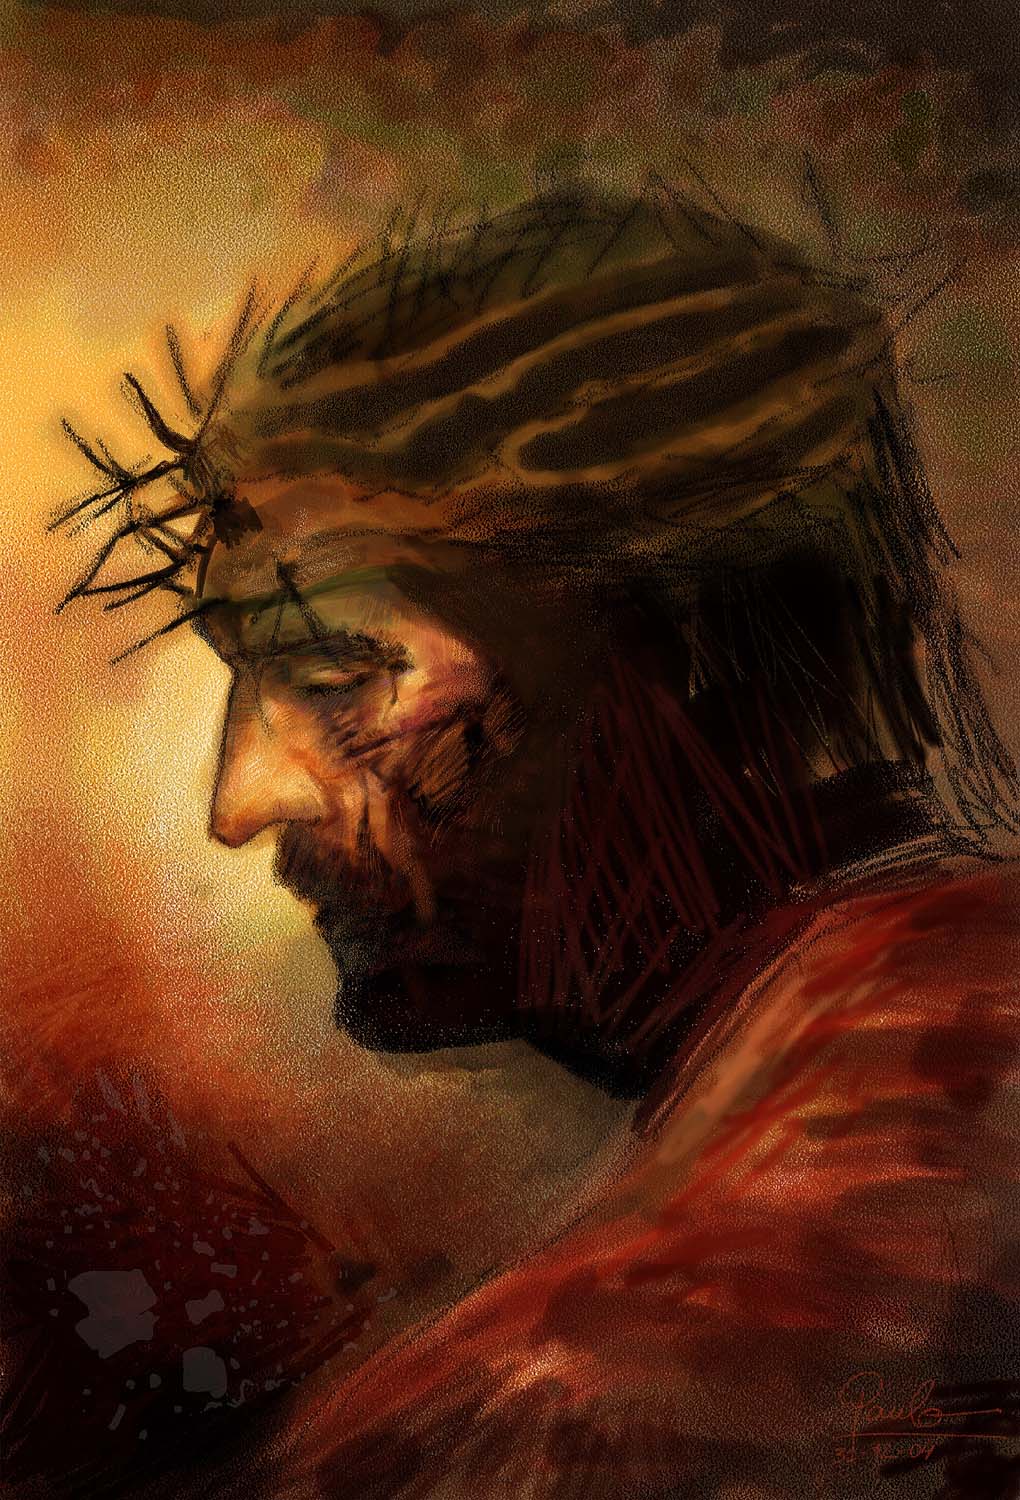 Displaying Image For The Passion Of Christ Wallpaper